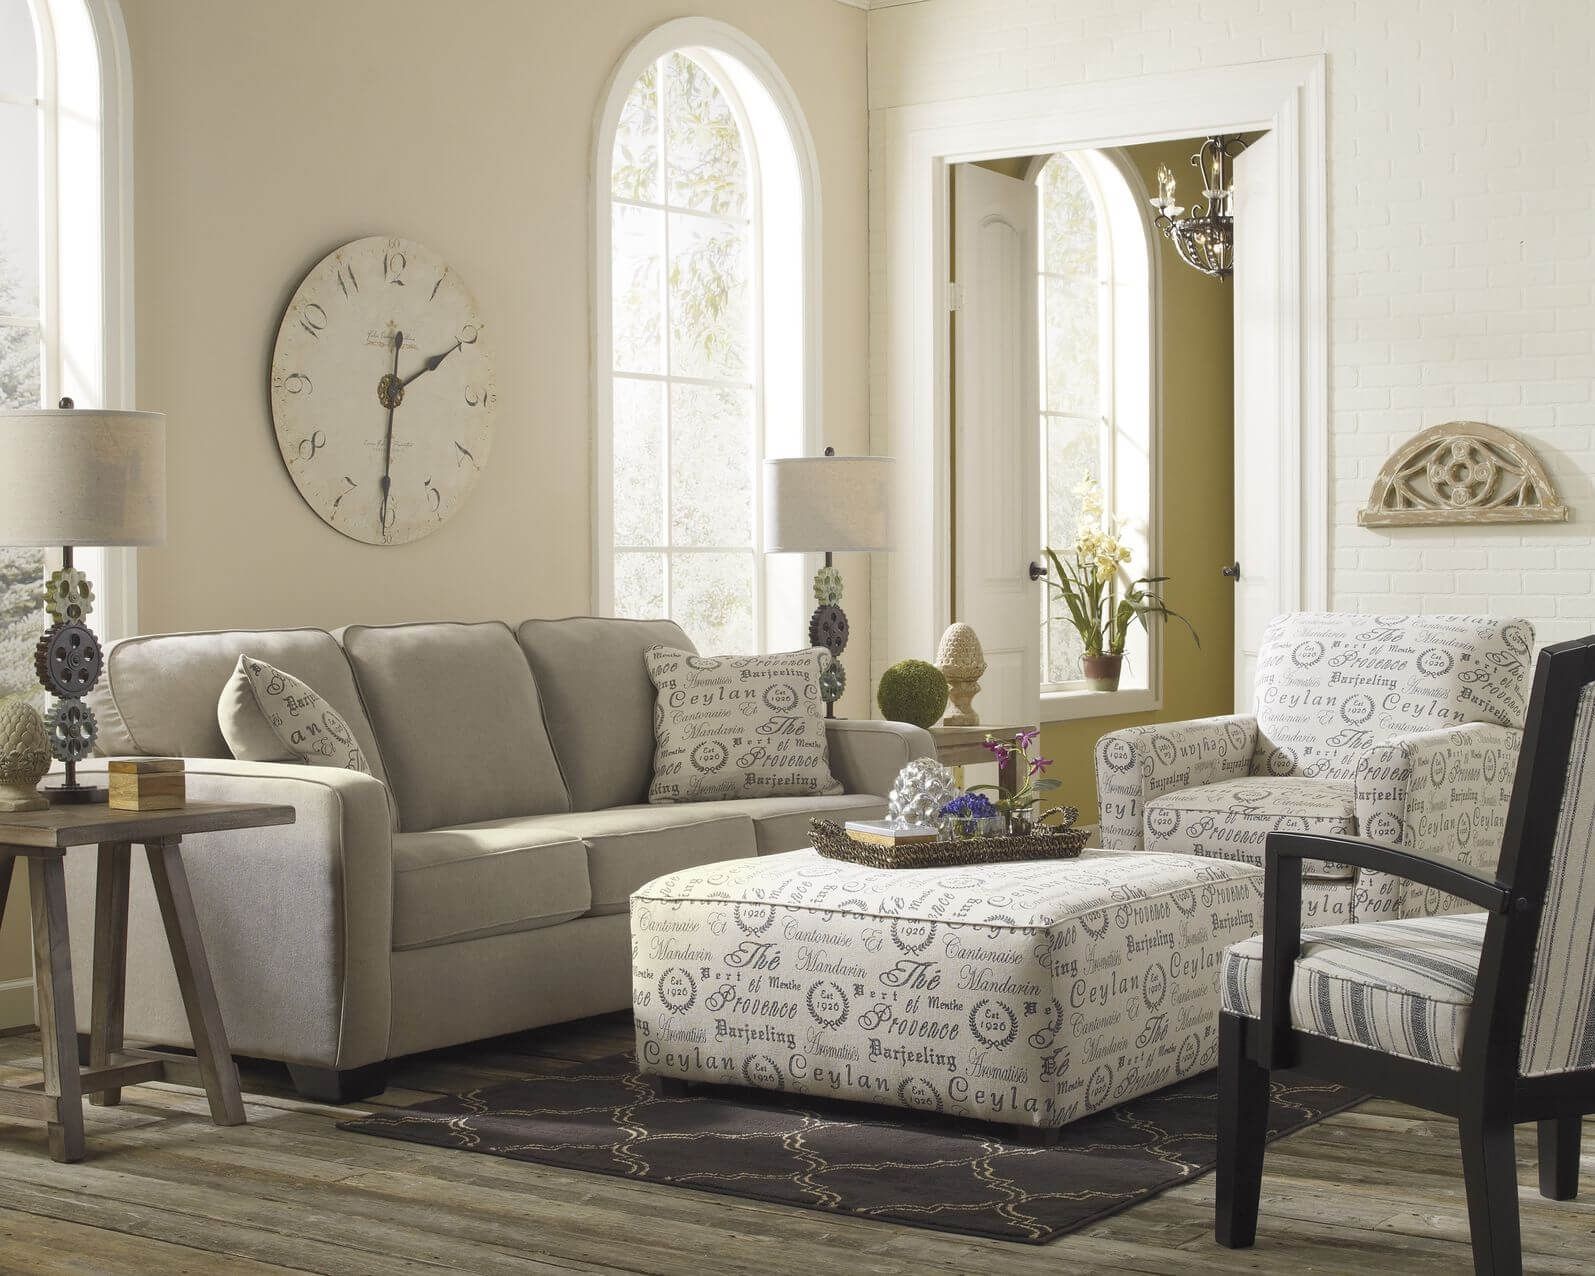 50 Beautiful Living Rooms With Ottoman Coffee Tables Within Coffee Table For Sectional Sofa (View 14 of 15)